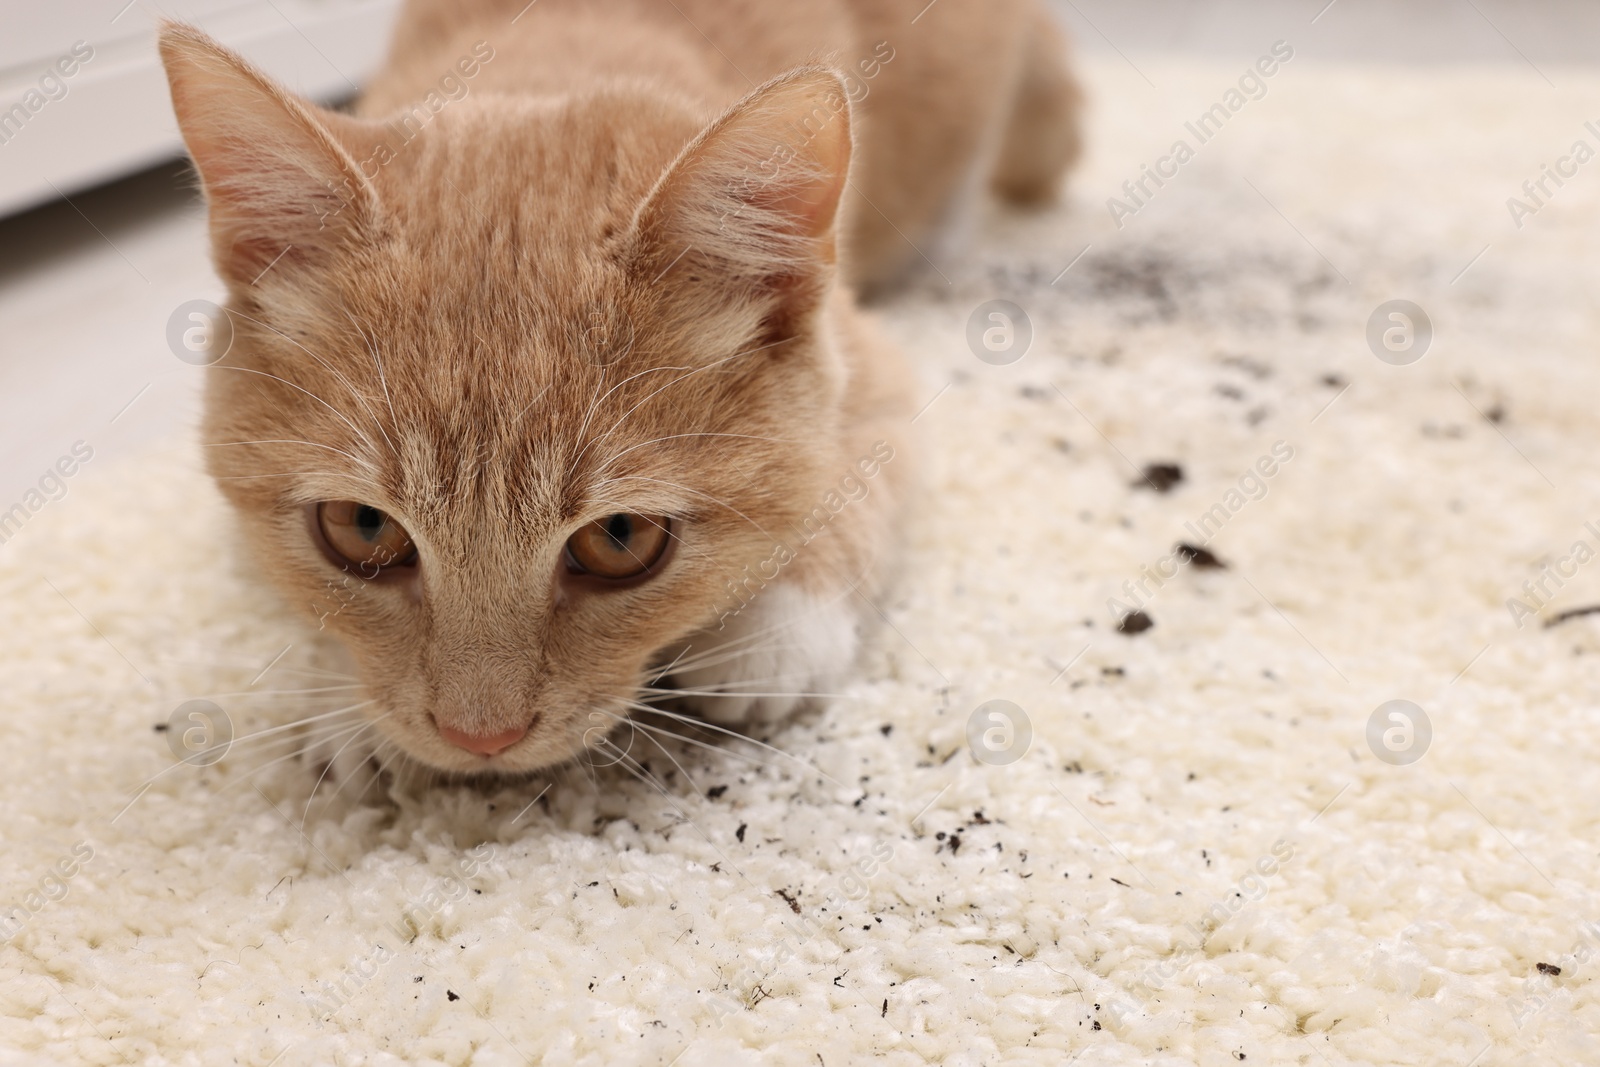 Photo of Cute ginger cat on carpet with scattered soil indoors, closeup